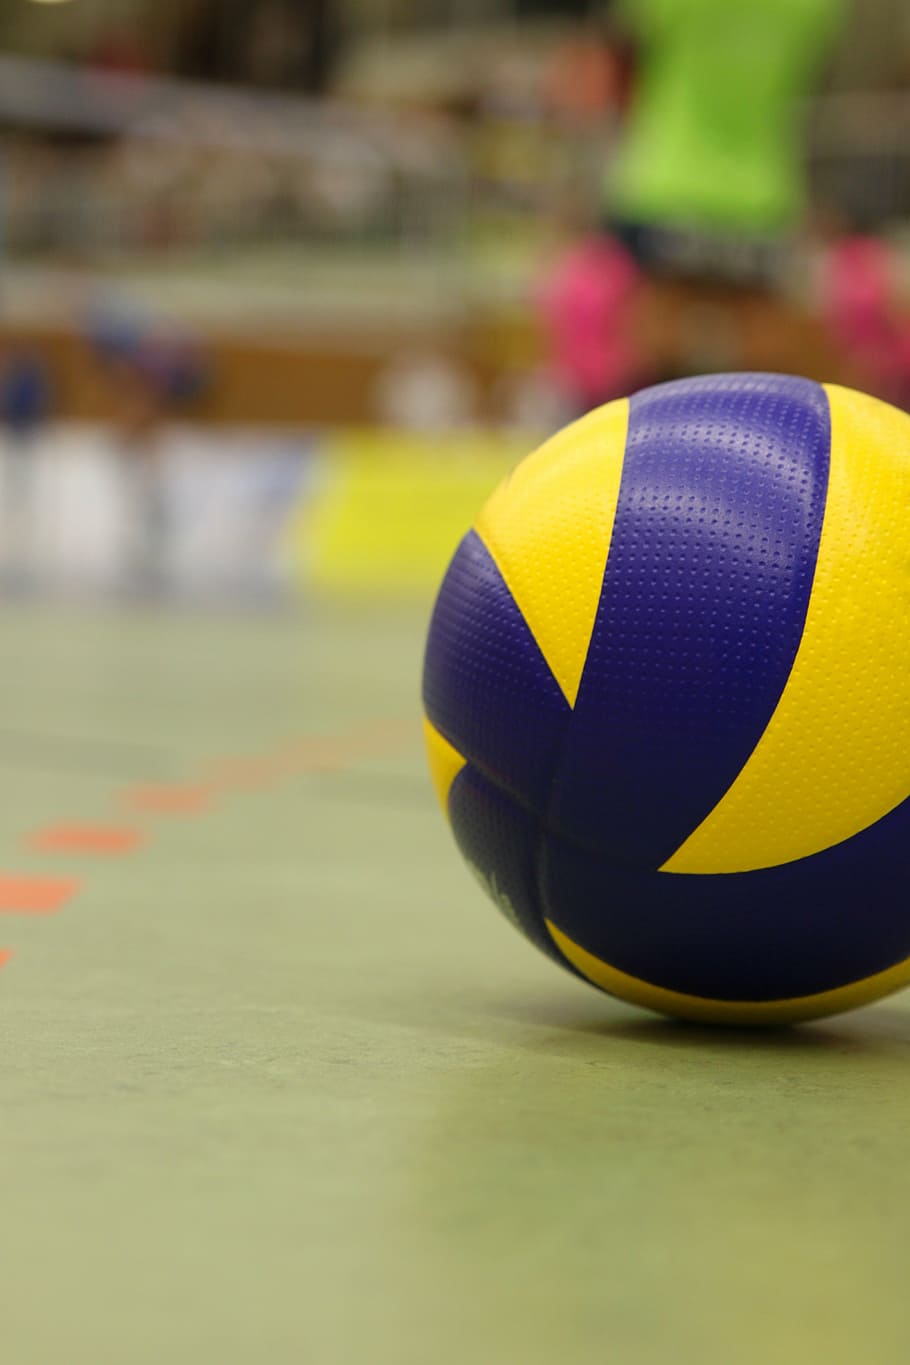 A volleyball on the floor of an arena - Volleyball